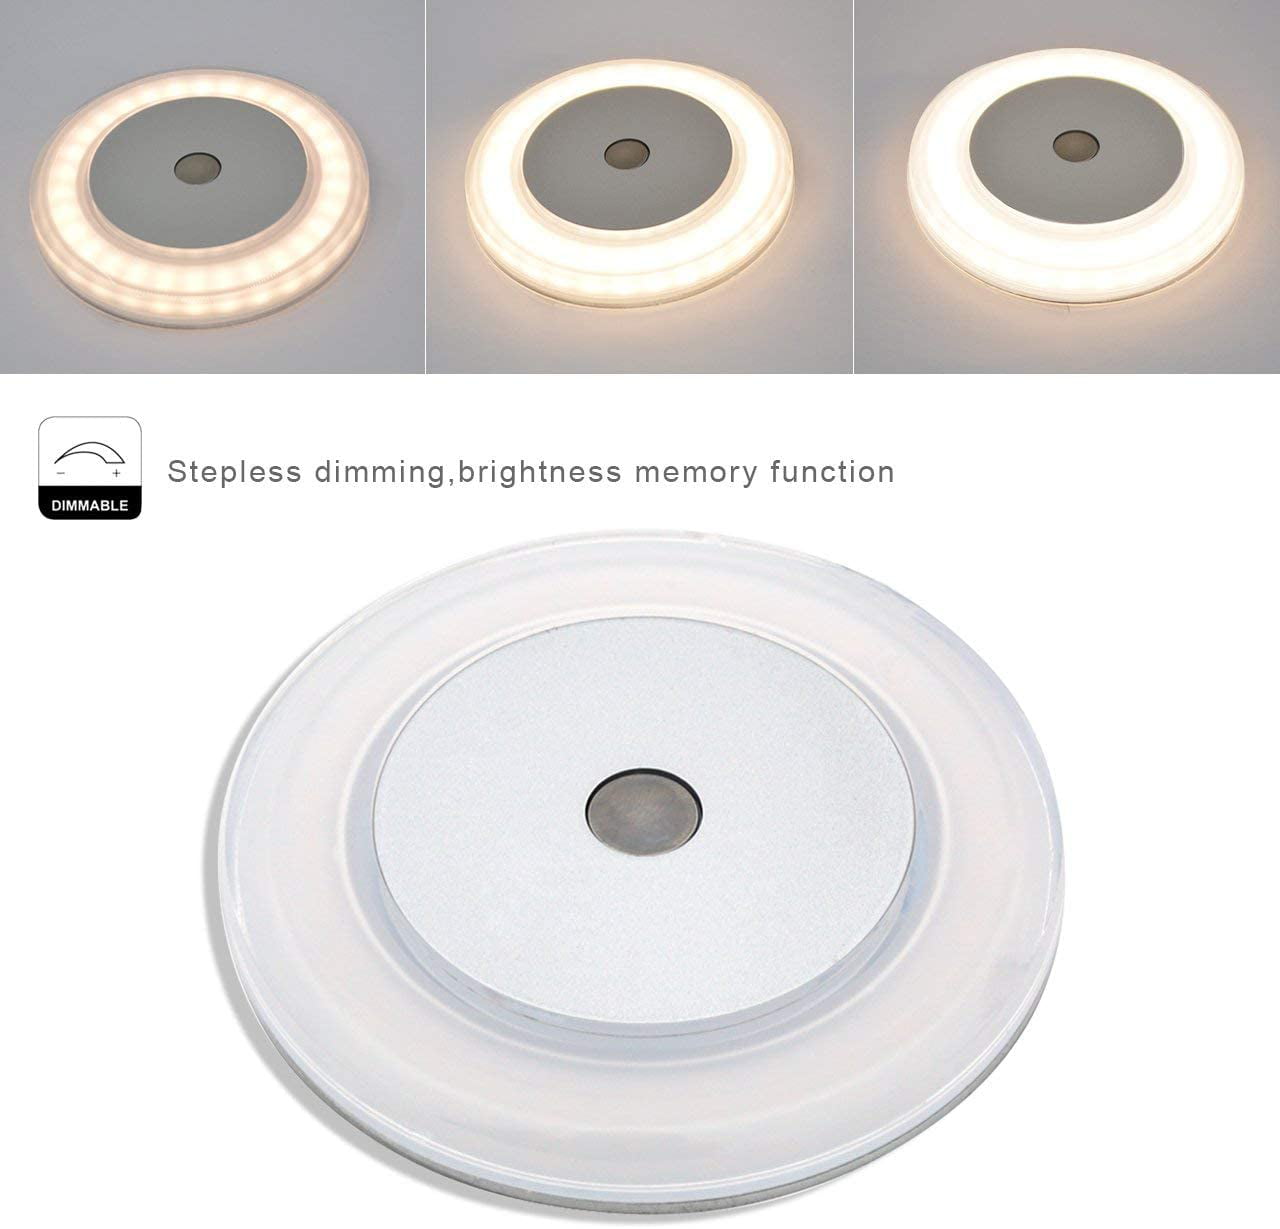 Genuine Marine DC 12V 3W 2800K Soft White Full Aluminum Tap Light Surface Mount and Hidden Fasteners Design Stepless Dimmable 2 Pk RV Boat Touch Ceiling LED Light Stainless Steel Screws Included 